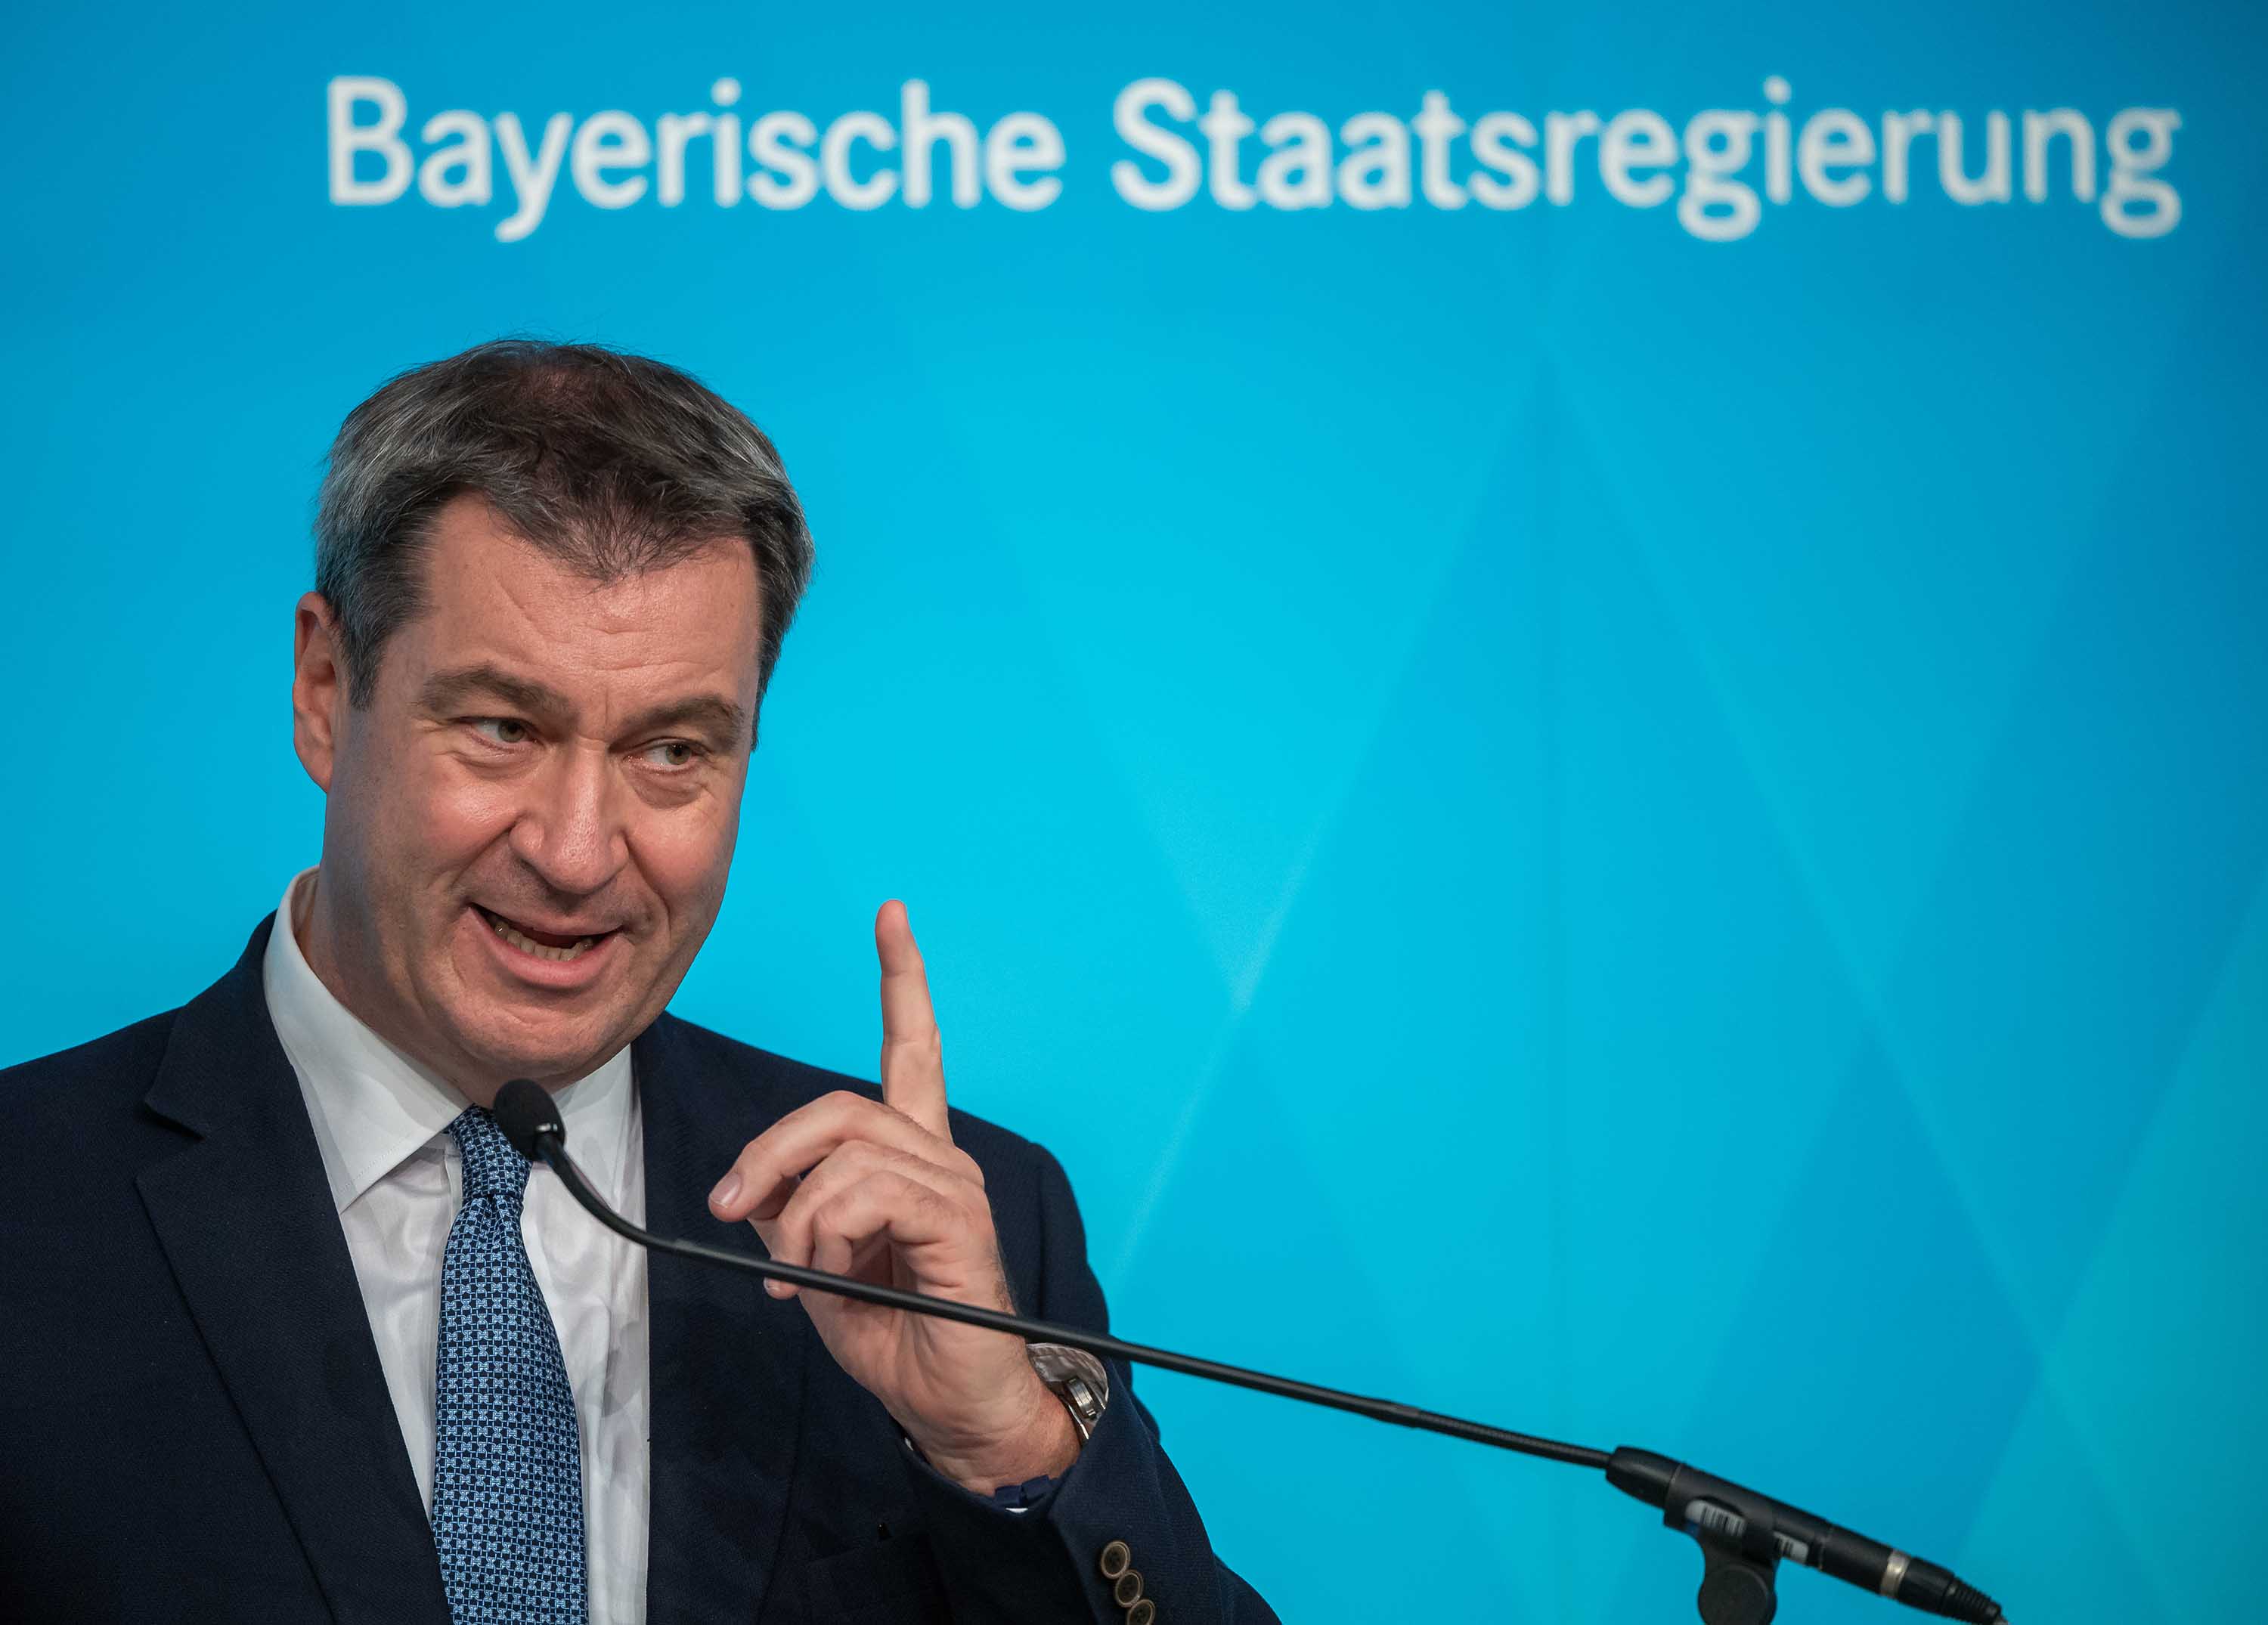 Bavarian state premier Markus Söder speaks at a press conference following a cabinet meeting of the Bavarian State Government on October 13.